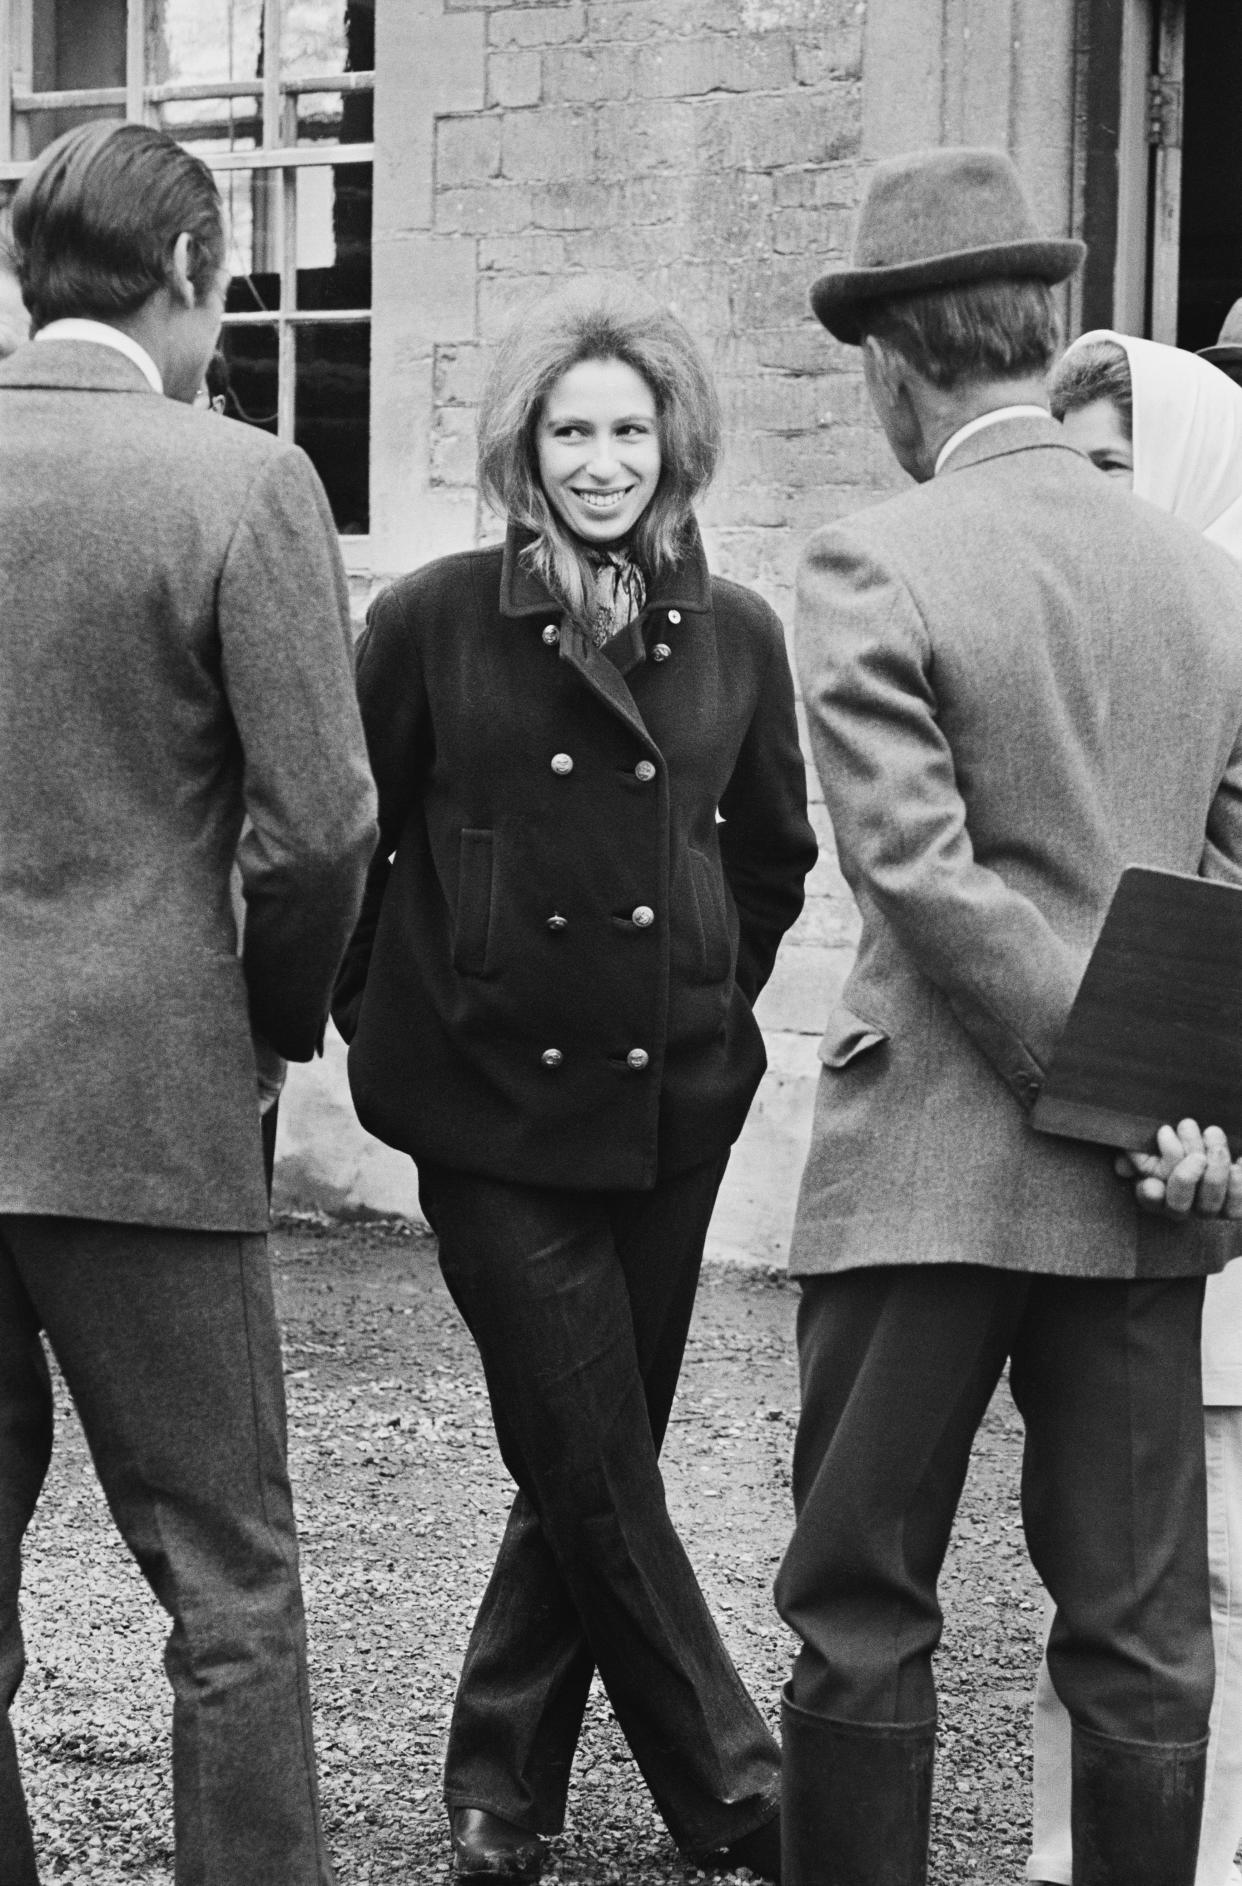 Princess Anne at the Badminton Horse Trials in South Gloucestershire, UK, 25th April 1971. (Photo by Harry Dempster/Daily Express/Getty Images)